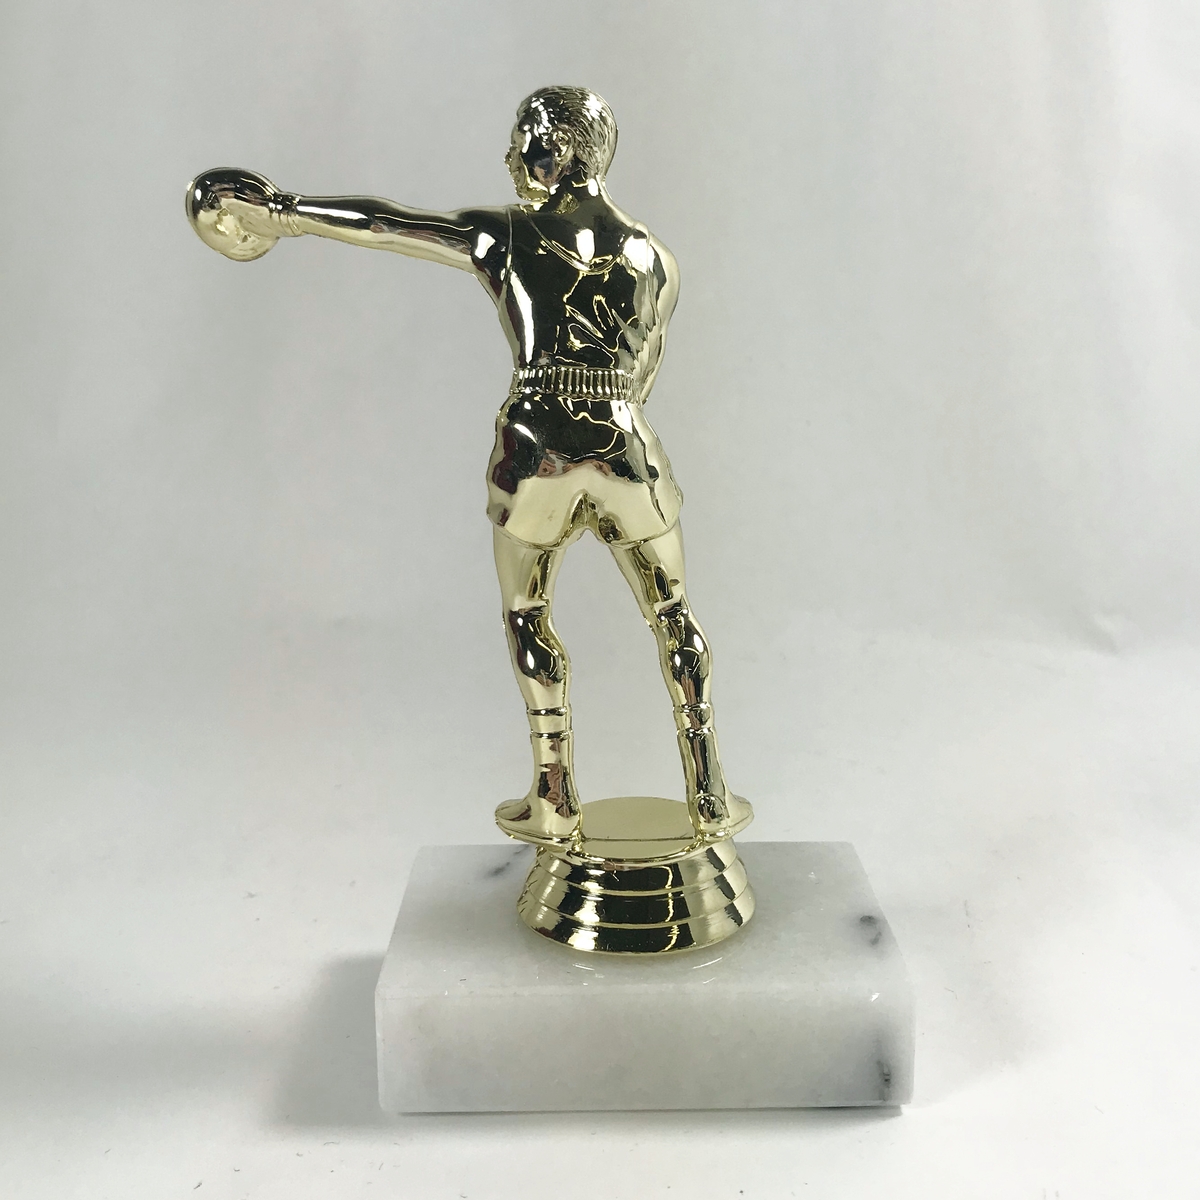 BOXING Boxer Trophy 8.5" or 9.5" FREE ENGRAVING Engraved Knockout Statue Award 